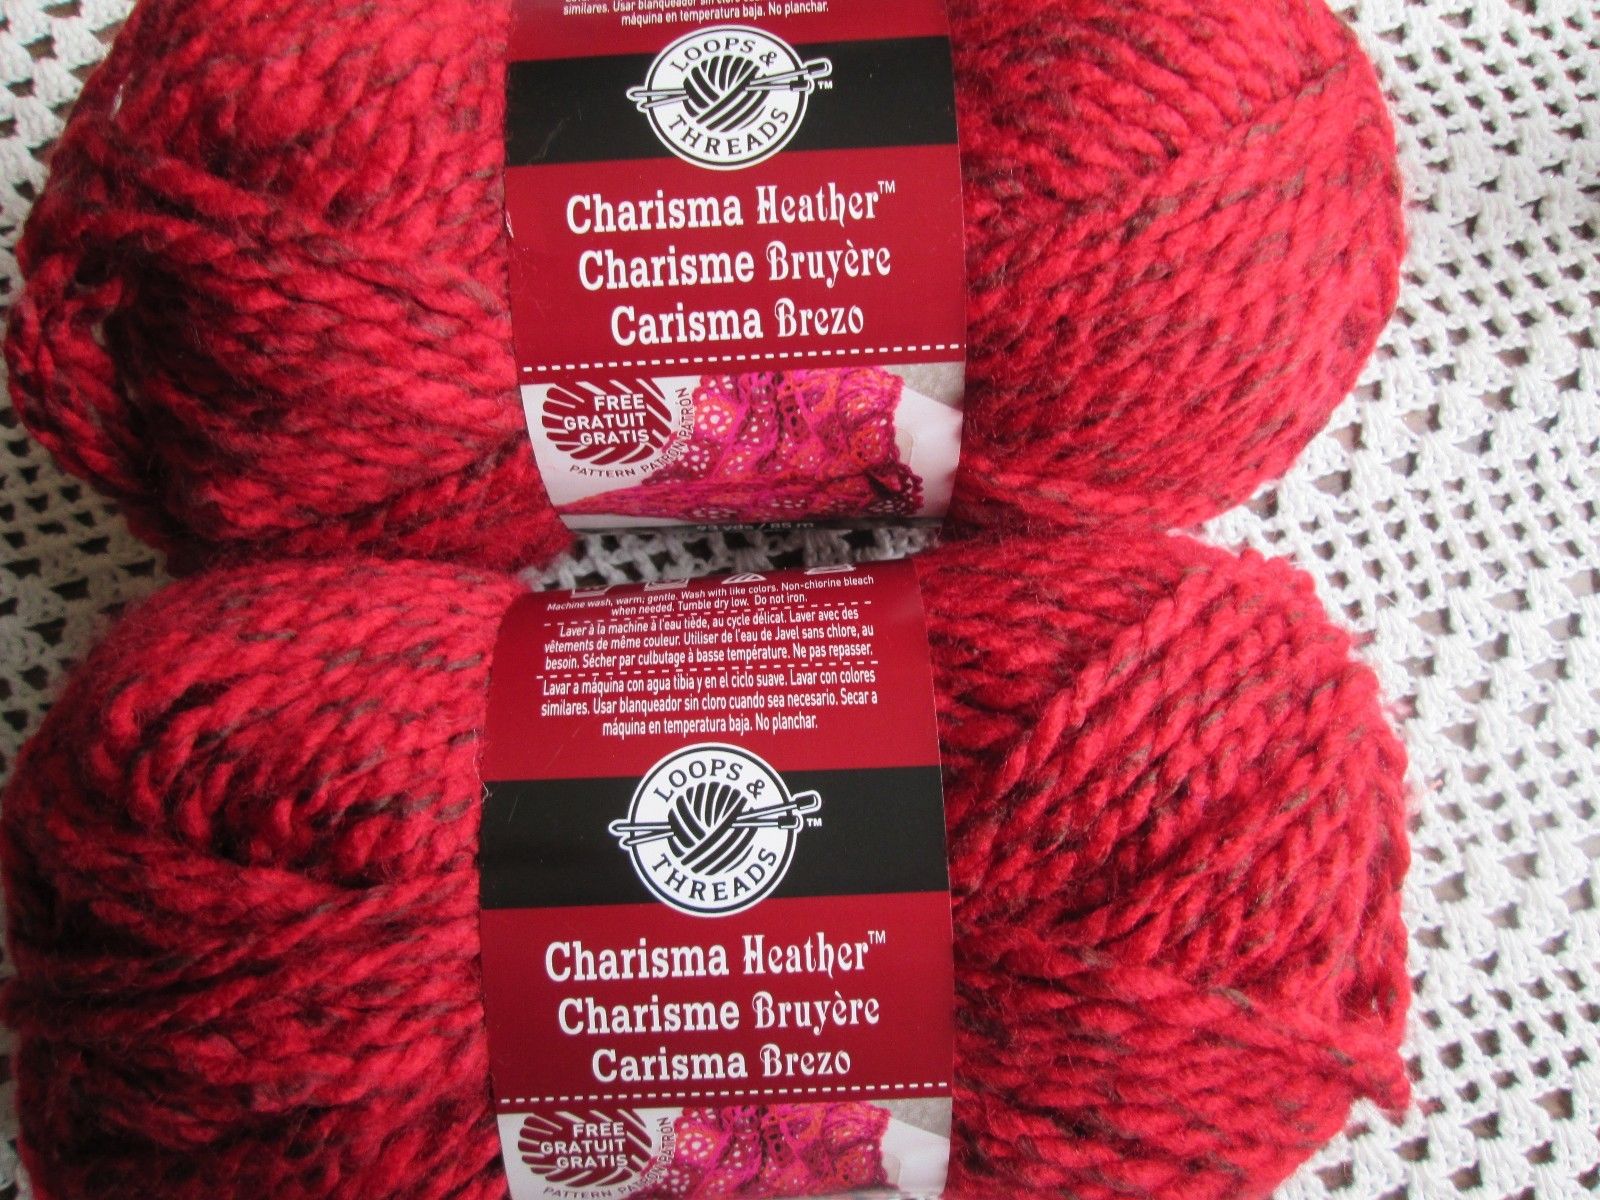 2 Skeins of Charisma Heather Yarn by Loops & Threads - Red | eBay